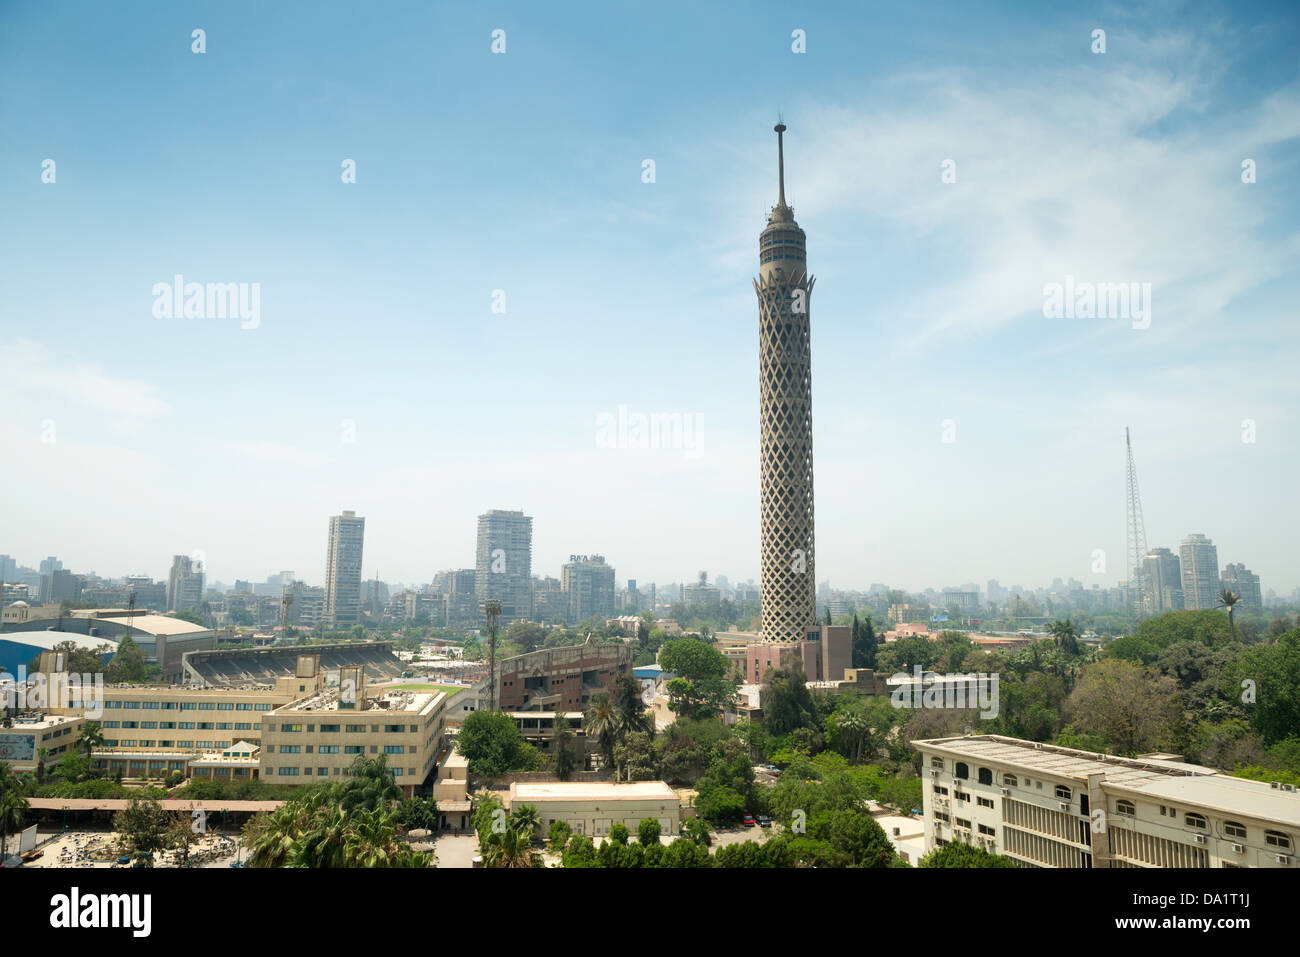 City view of Cairo tower, Egypt Stock Photo